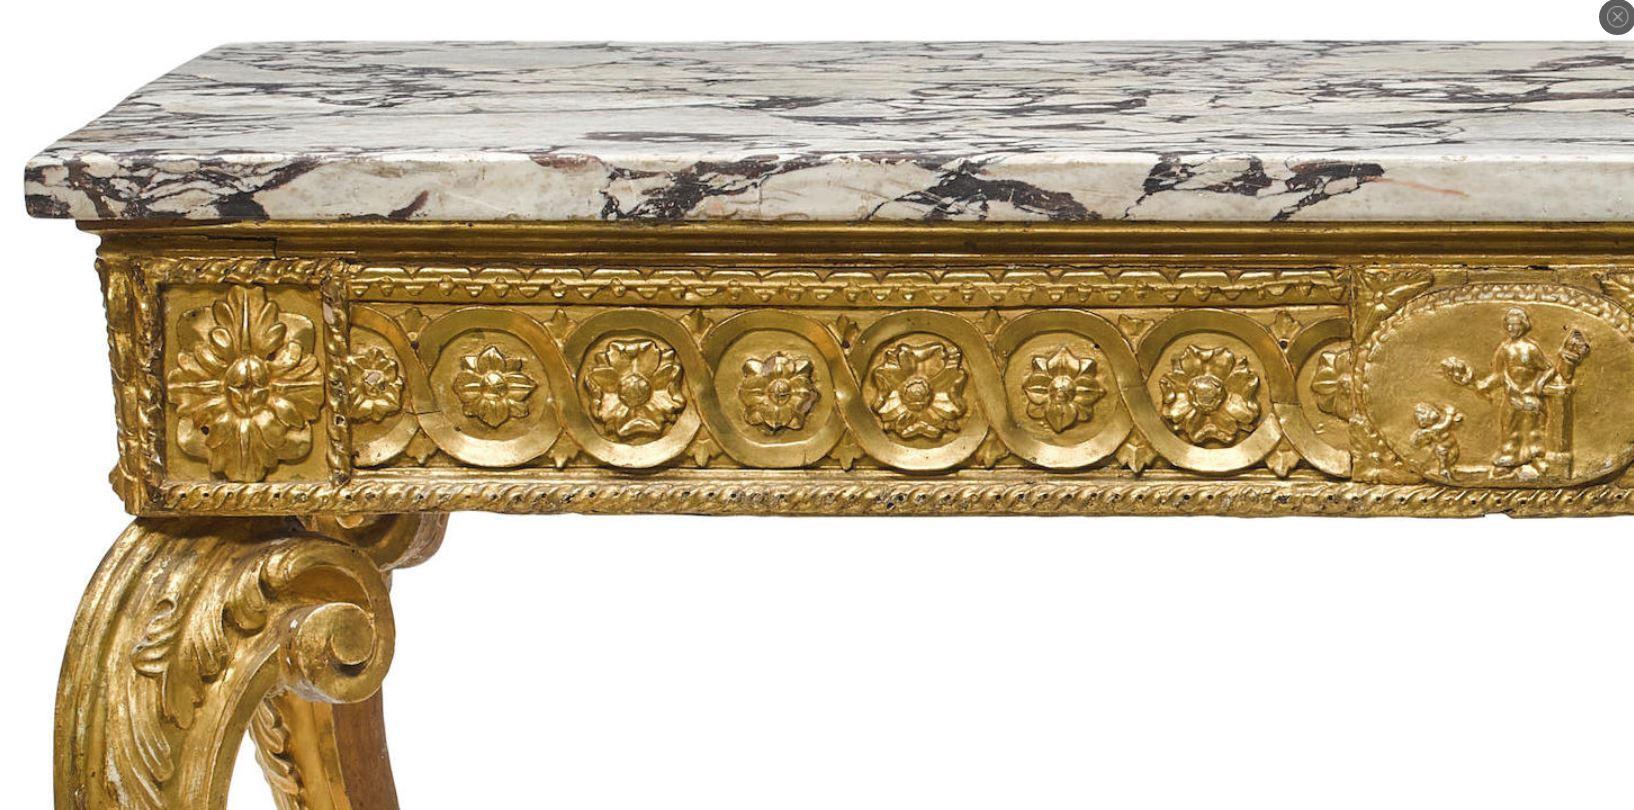 Carved Italian Neoclassical Giltwood Console, 18th Century